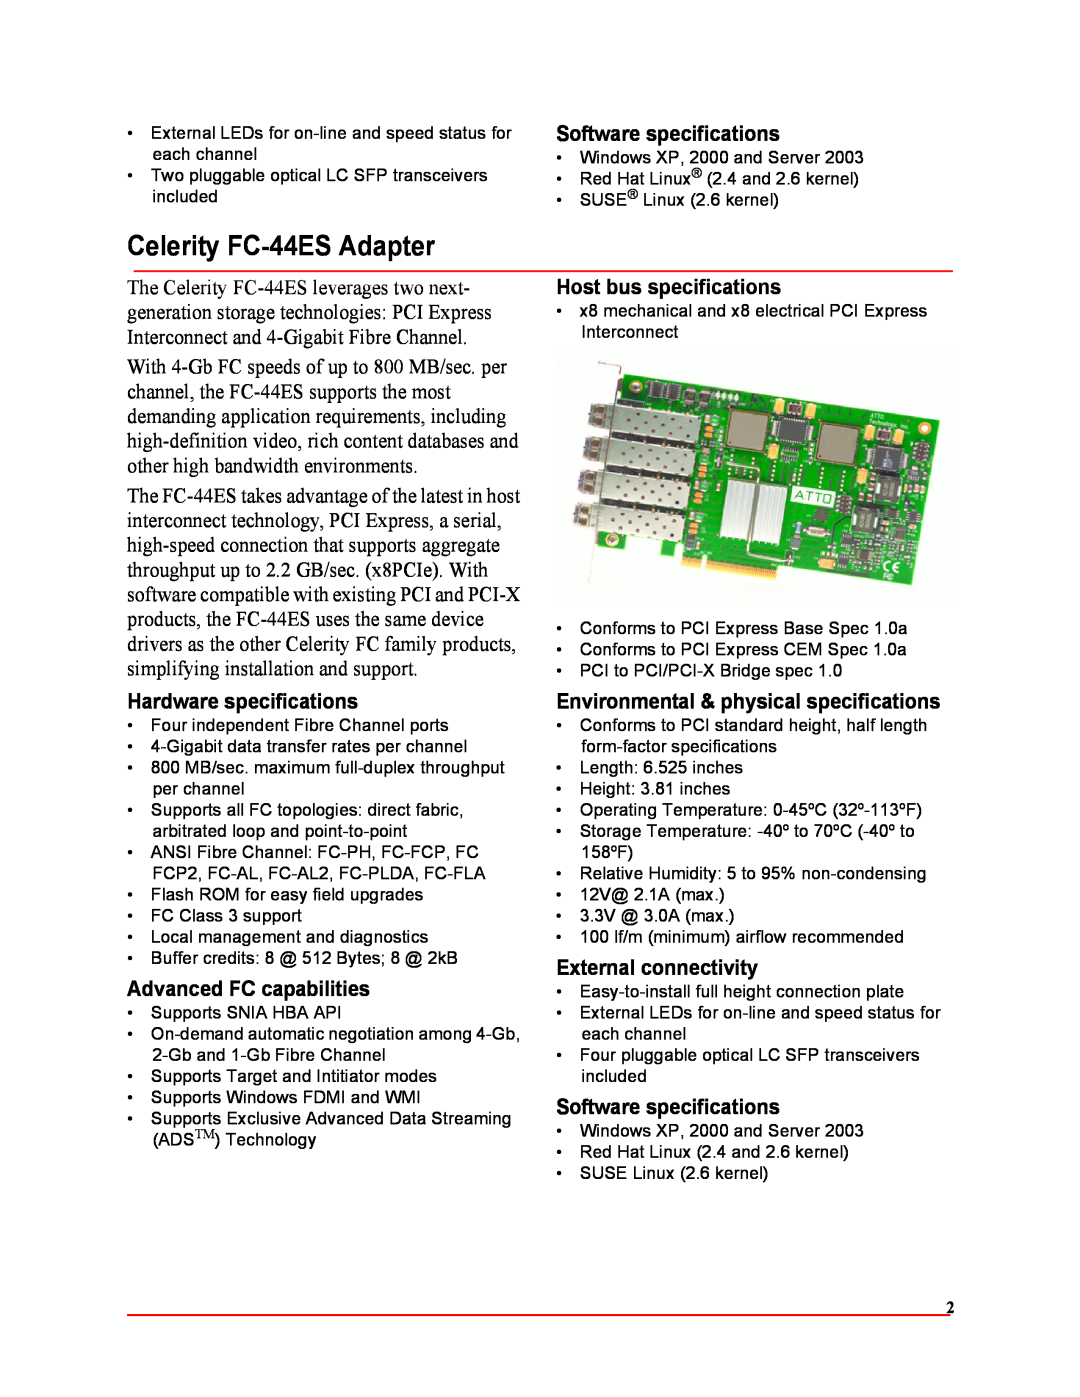 ATTO Technology Celerity FC-44ES Adapter, Software specifications, Hardware specifications, Advanced FC capabilities 